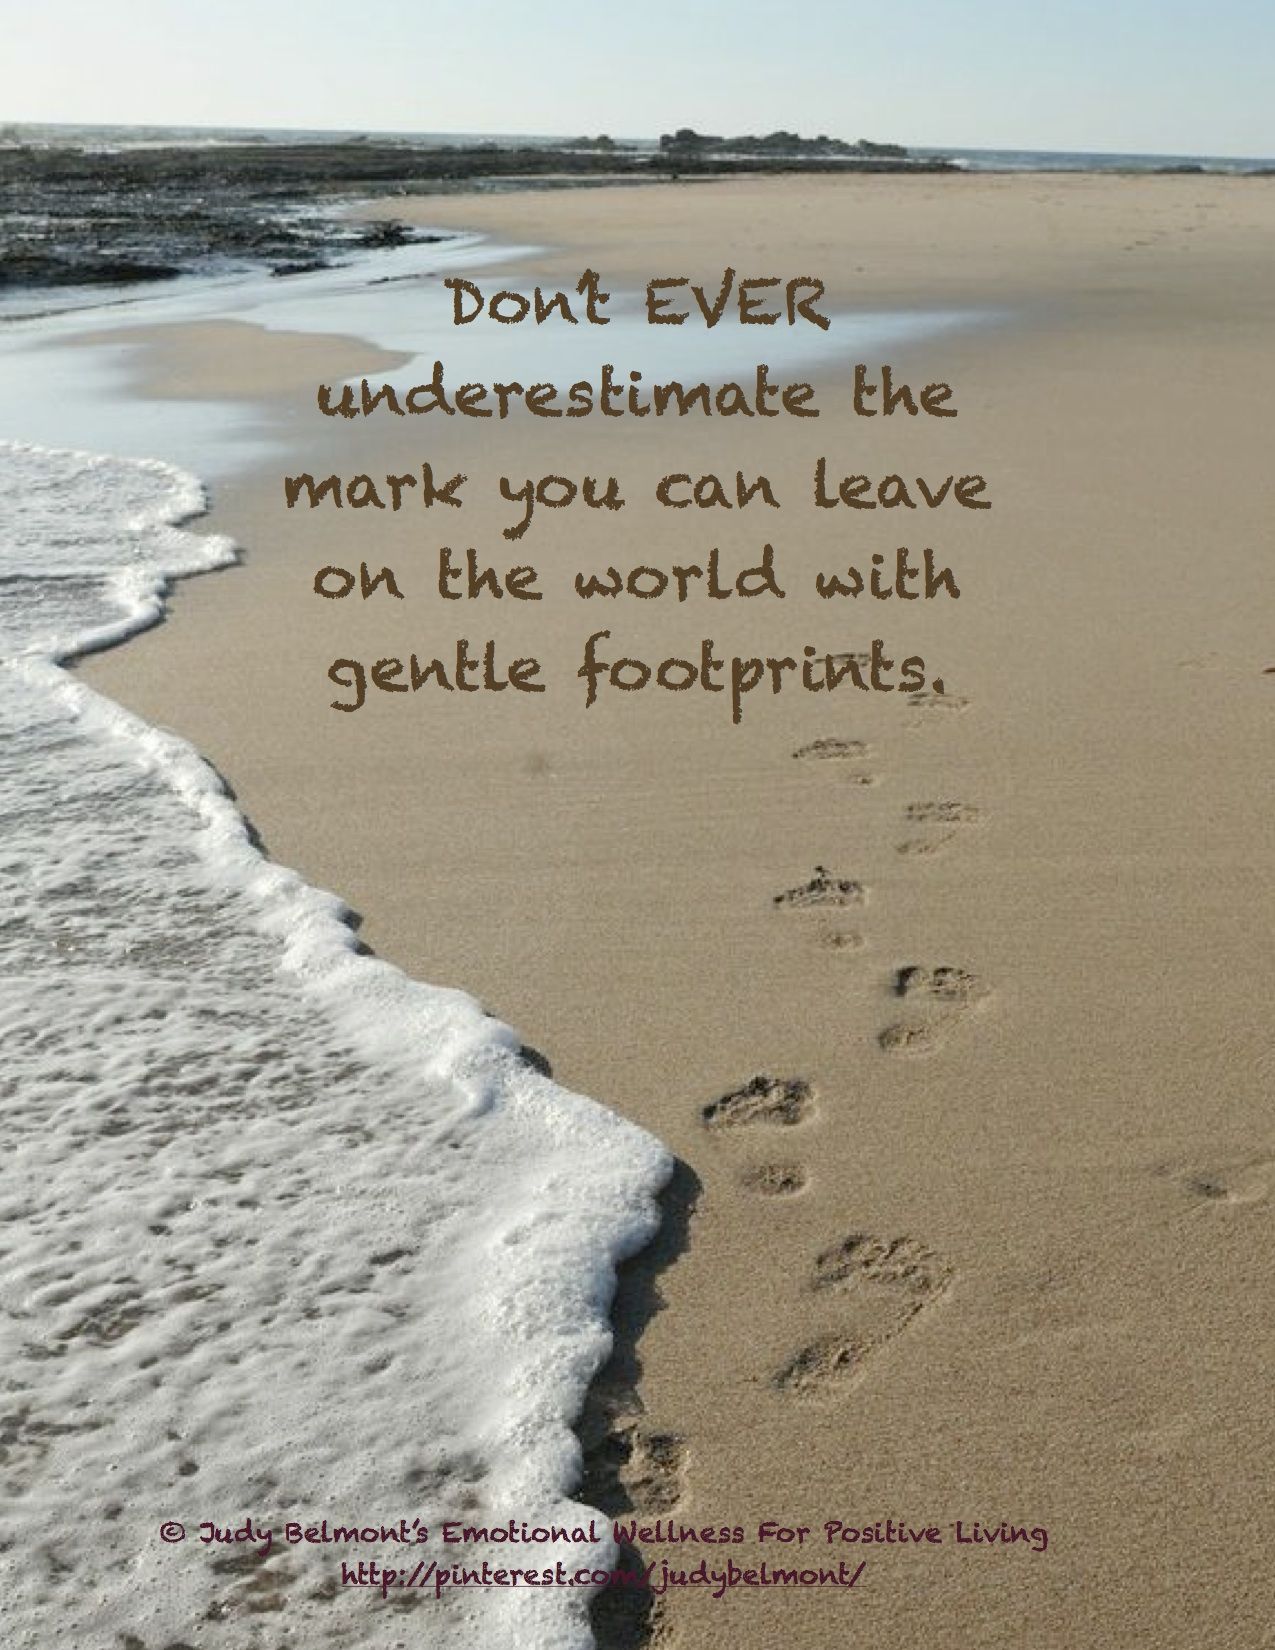 Never underestimate the importance of your gentle footprints on the